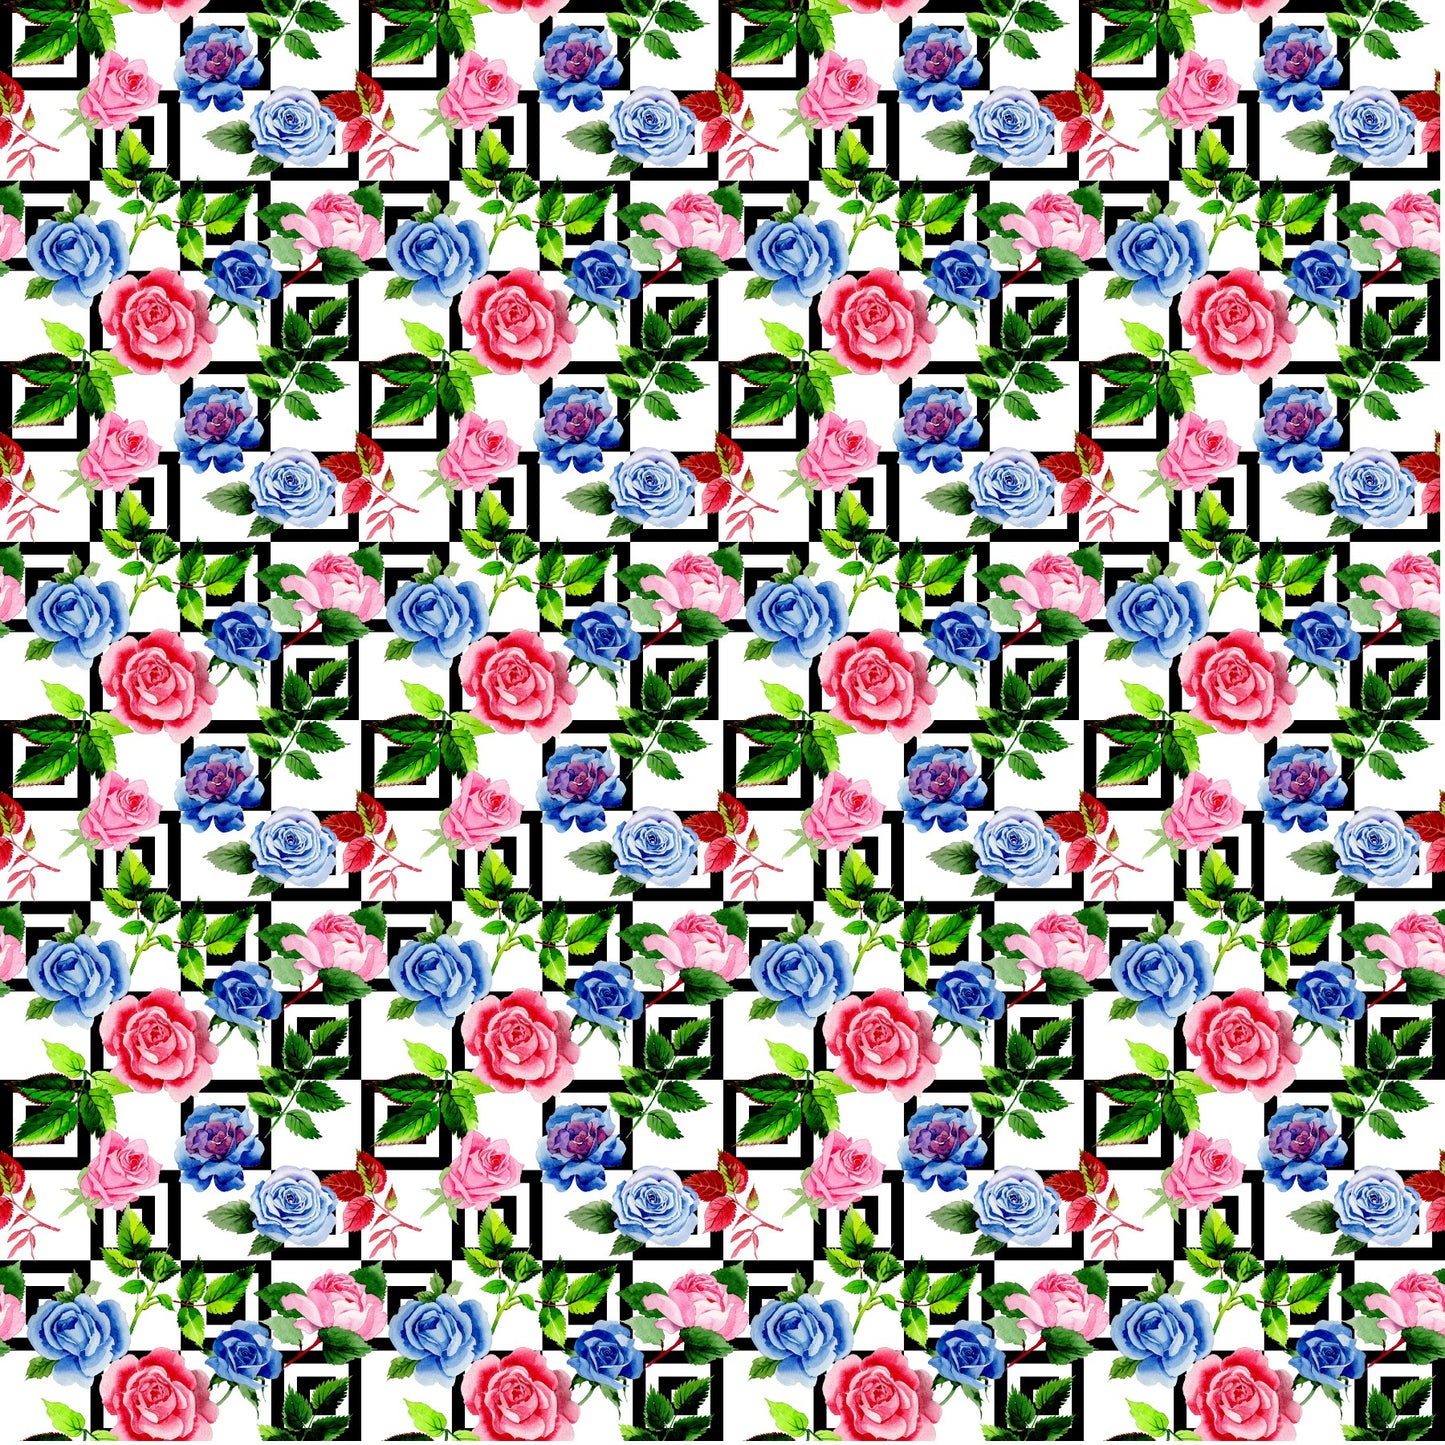 Pink And Blue Roses On A Geometric Background - Adhesive Vinyl